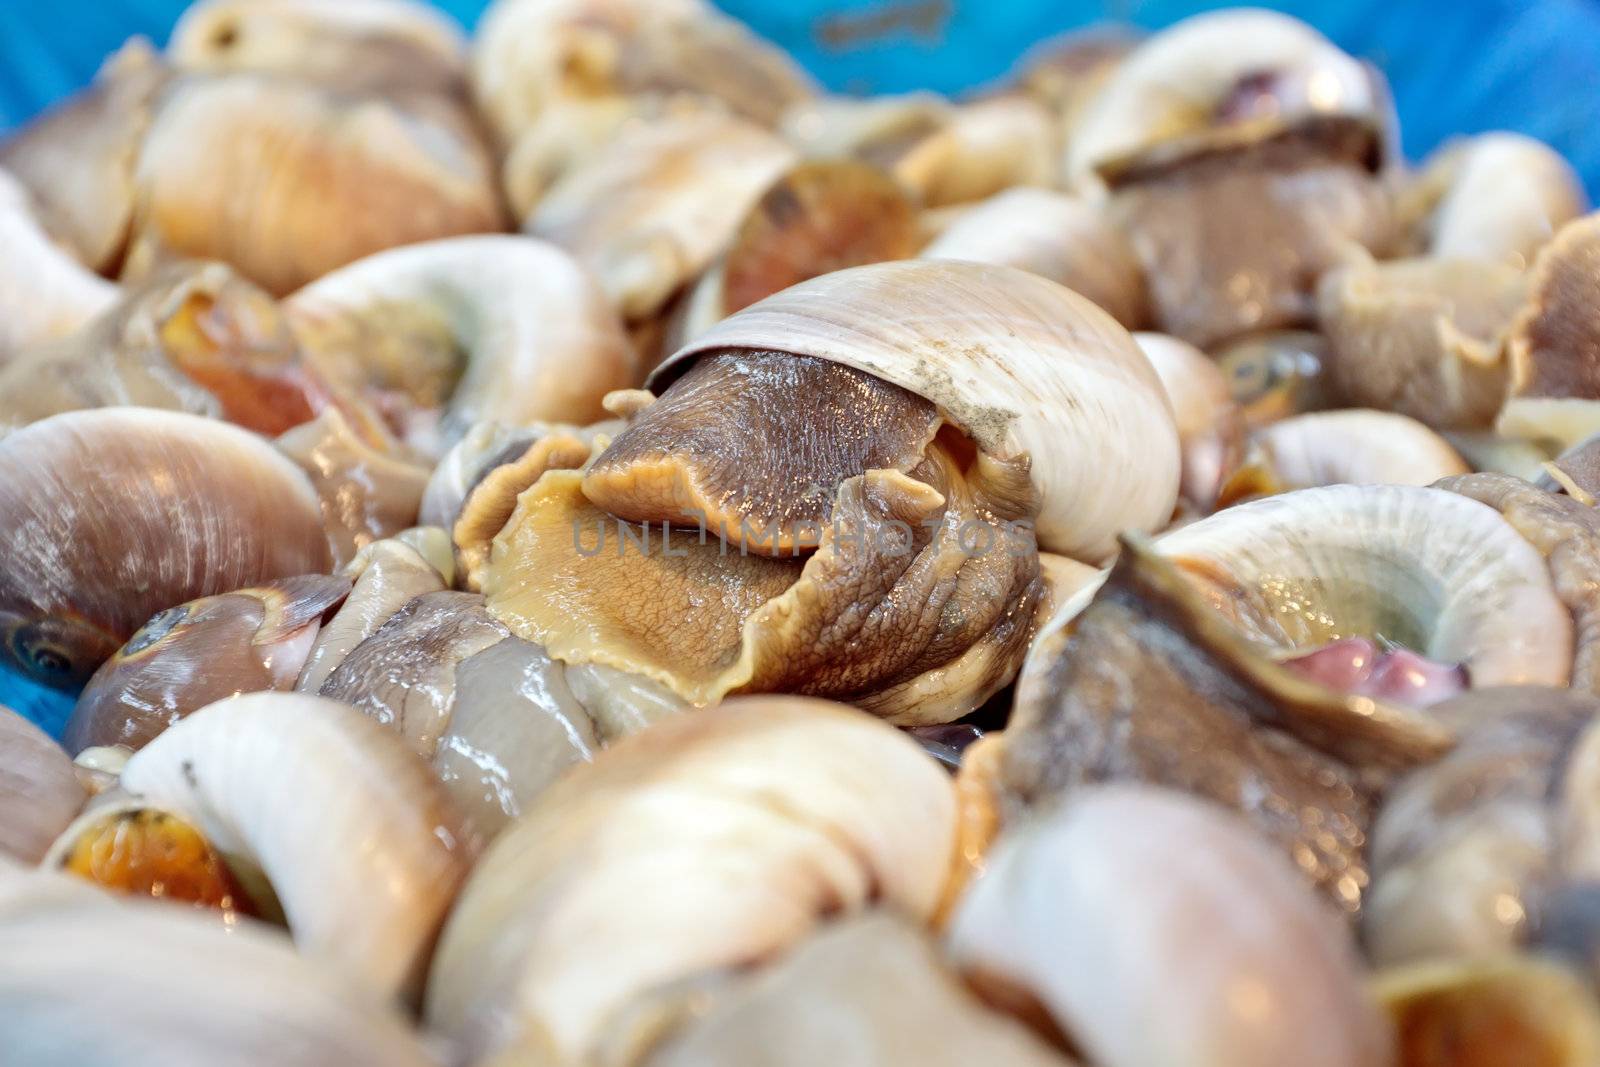 Fresh snails with selected focus in supermarket